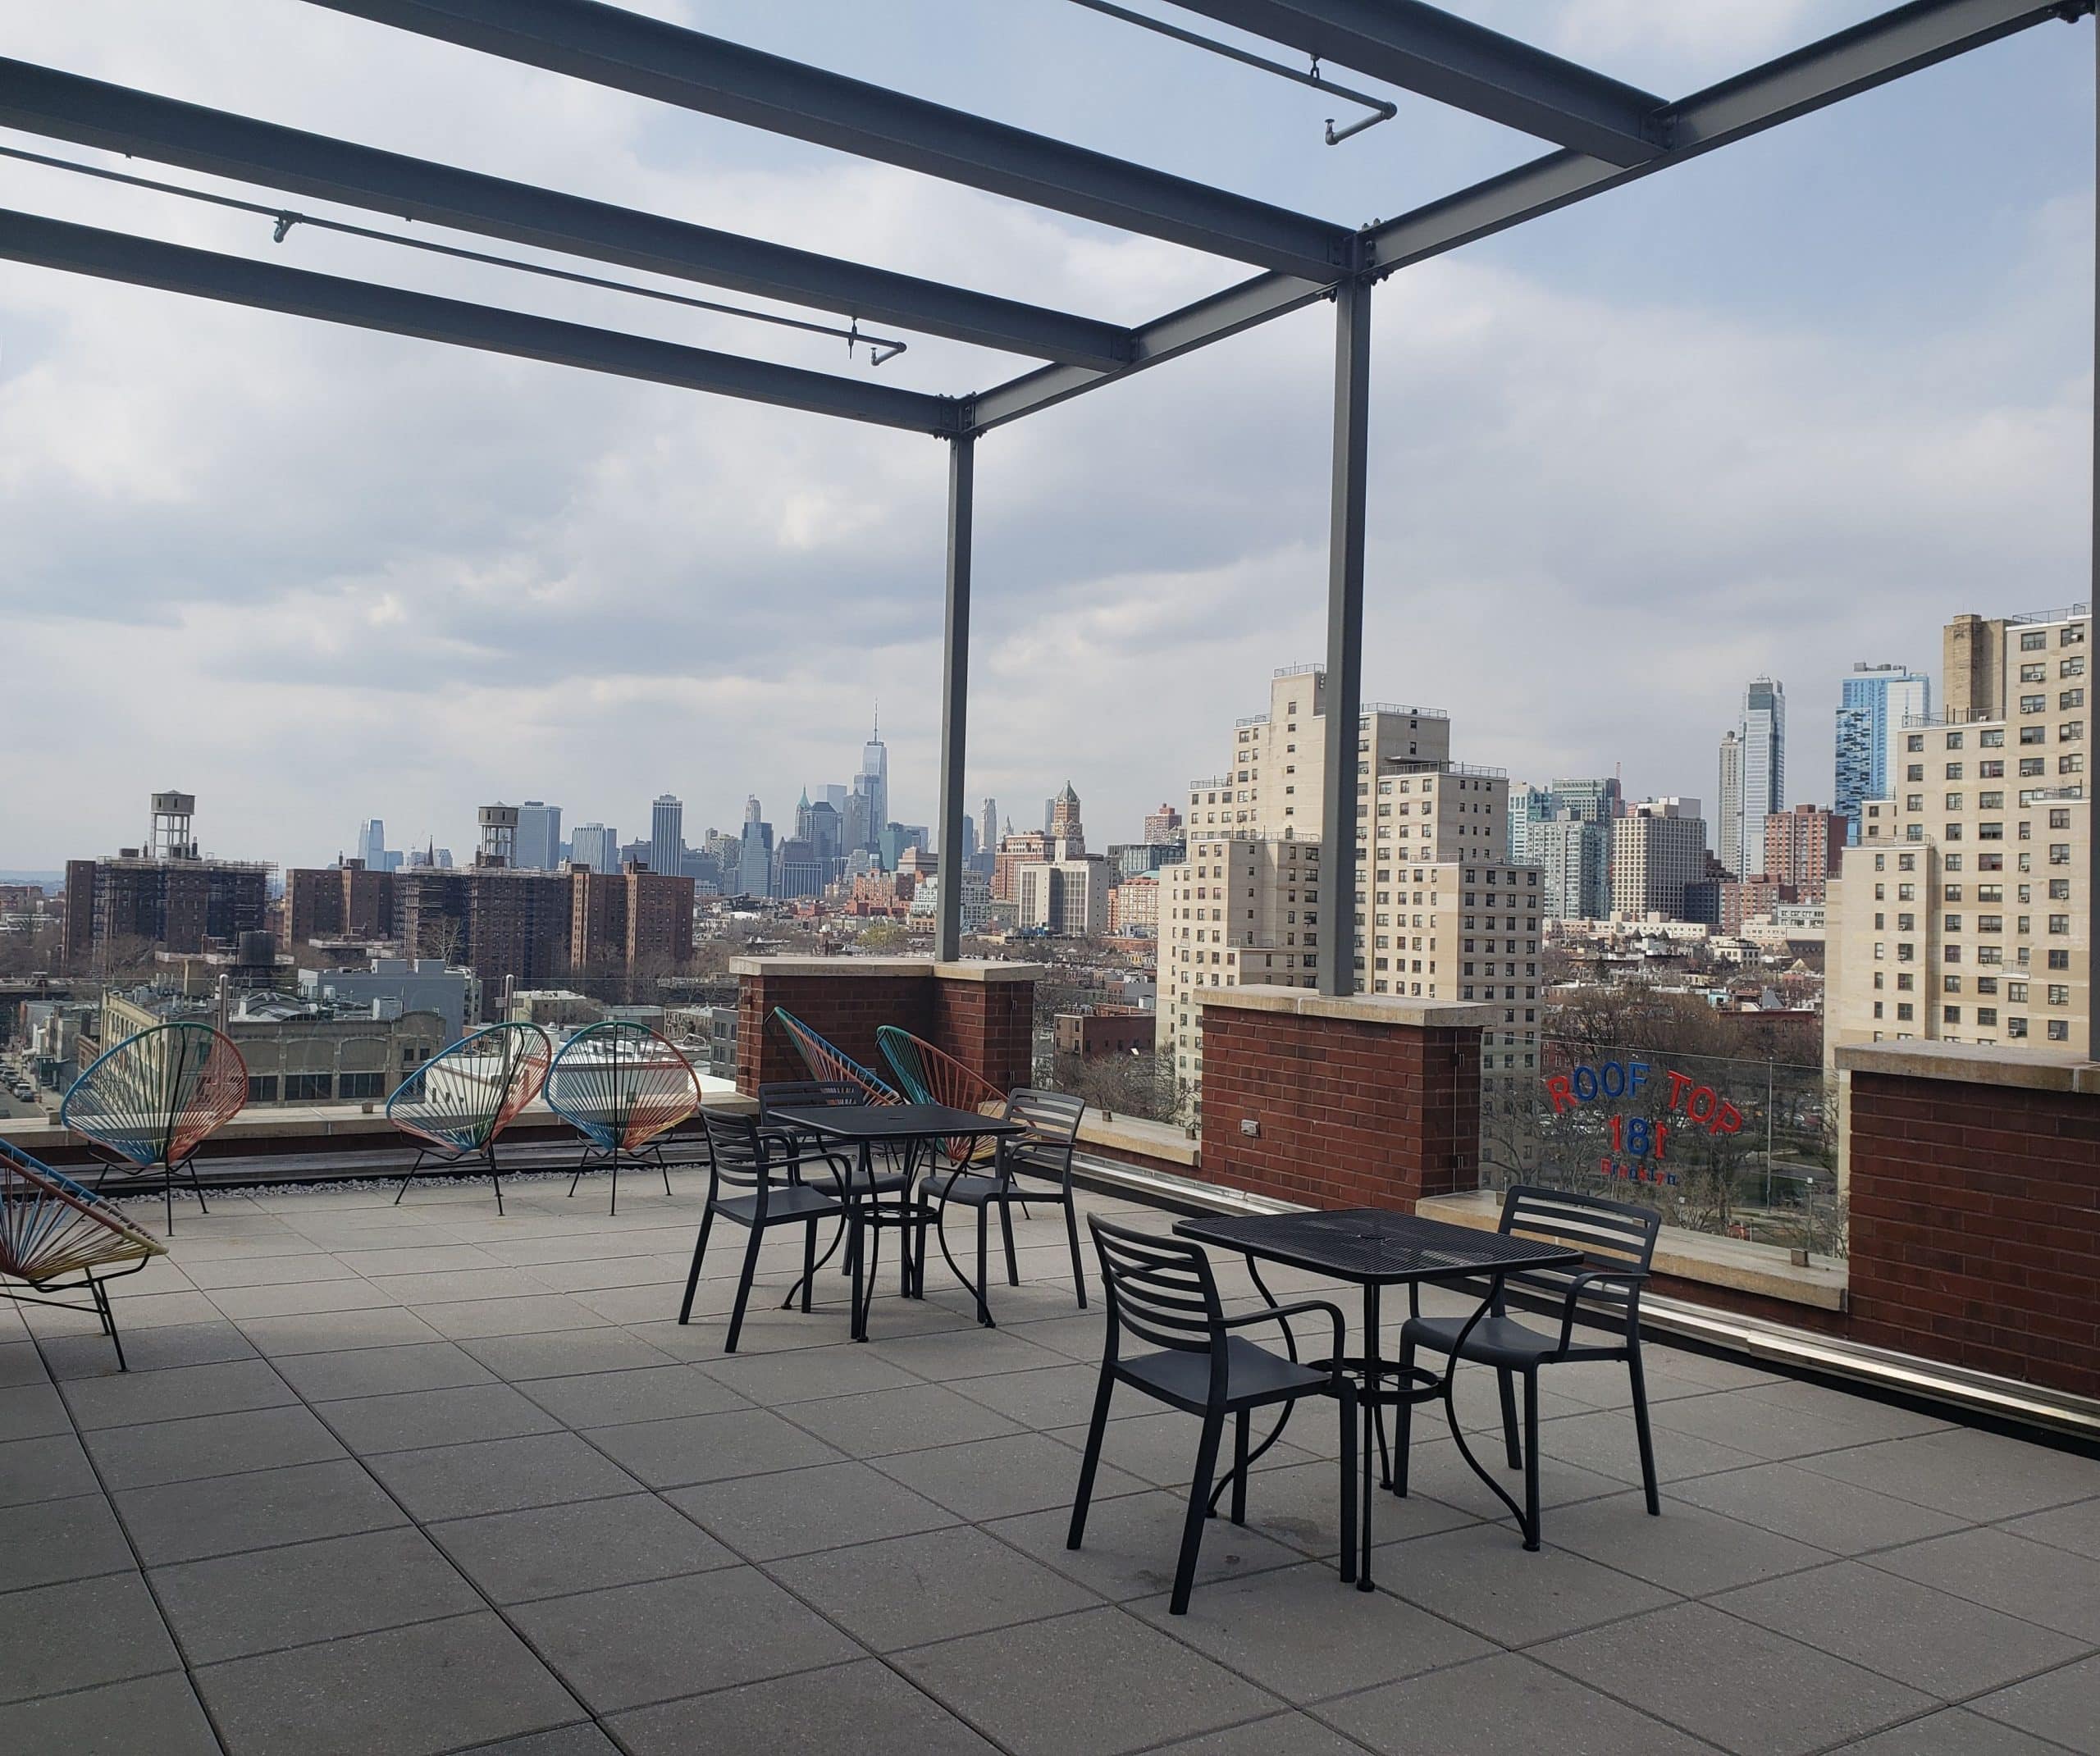 Our hotel is in the heart of Brooklyn NYC, with a rooftop view, near ...